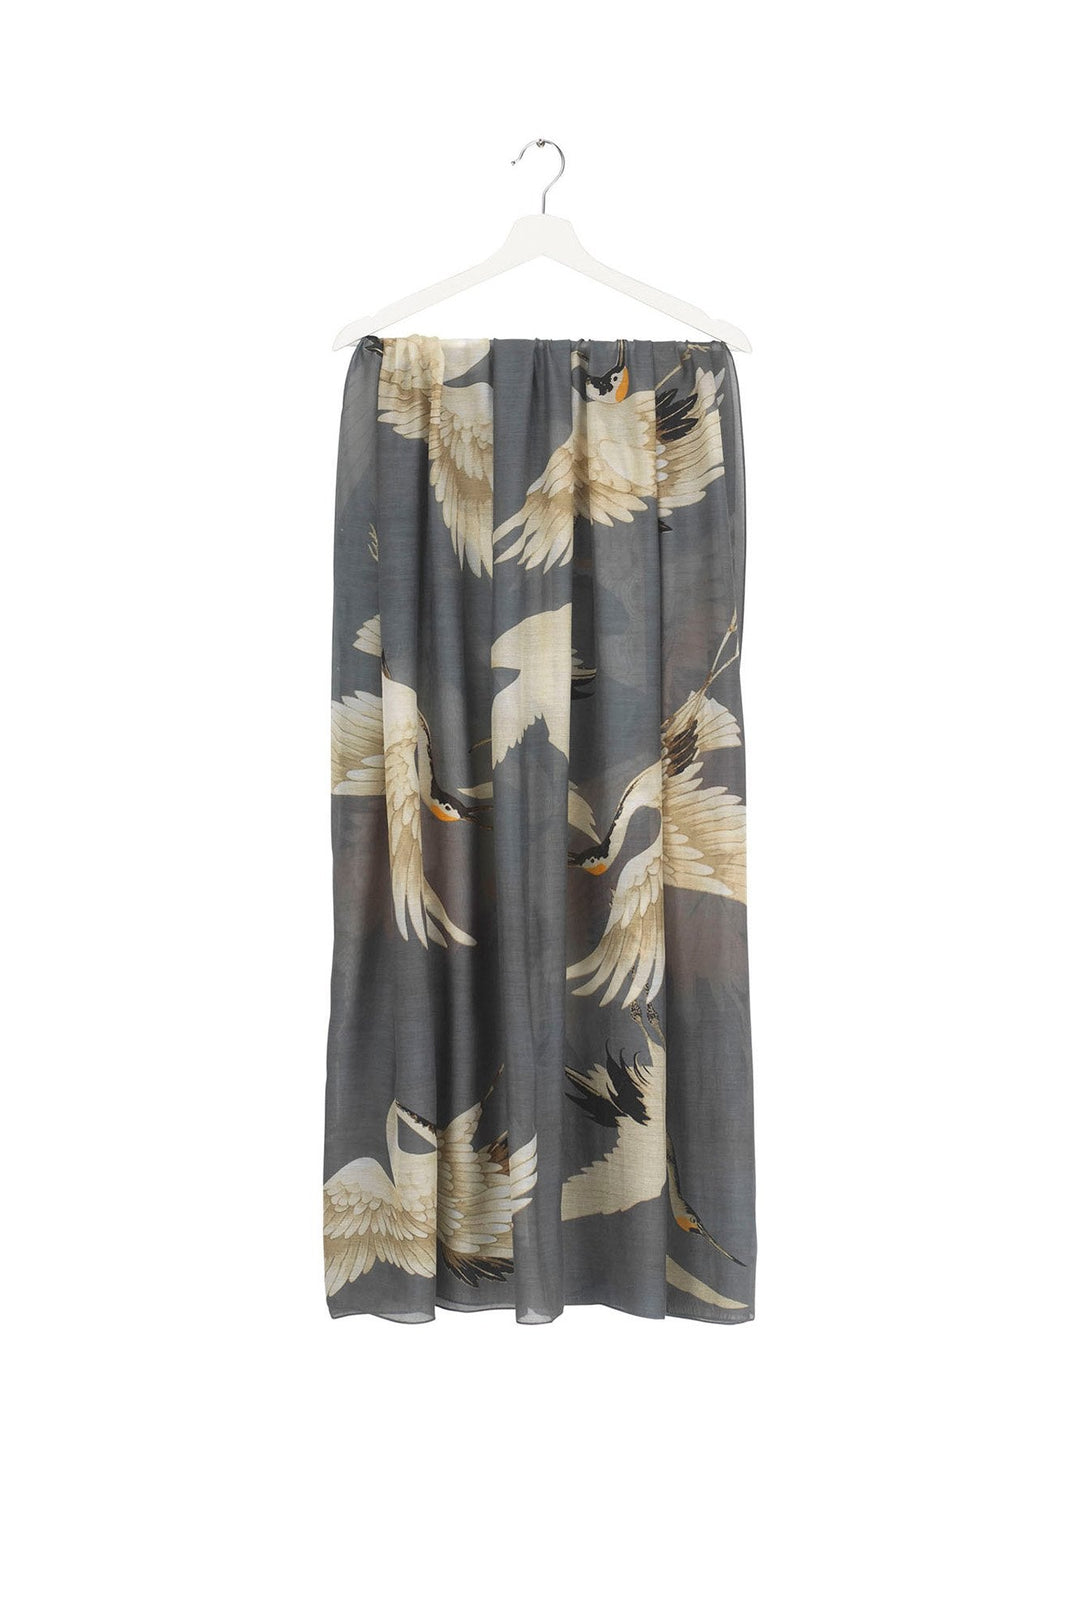 Storks and cranes have been a major art deco trend in both fashion and interiors and this Stork Slate Grey Scarf is perfect for anyone looking for something chic, stylish and in vogue!